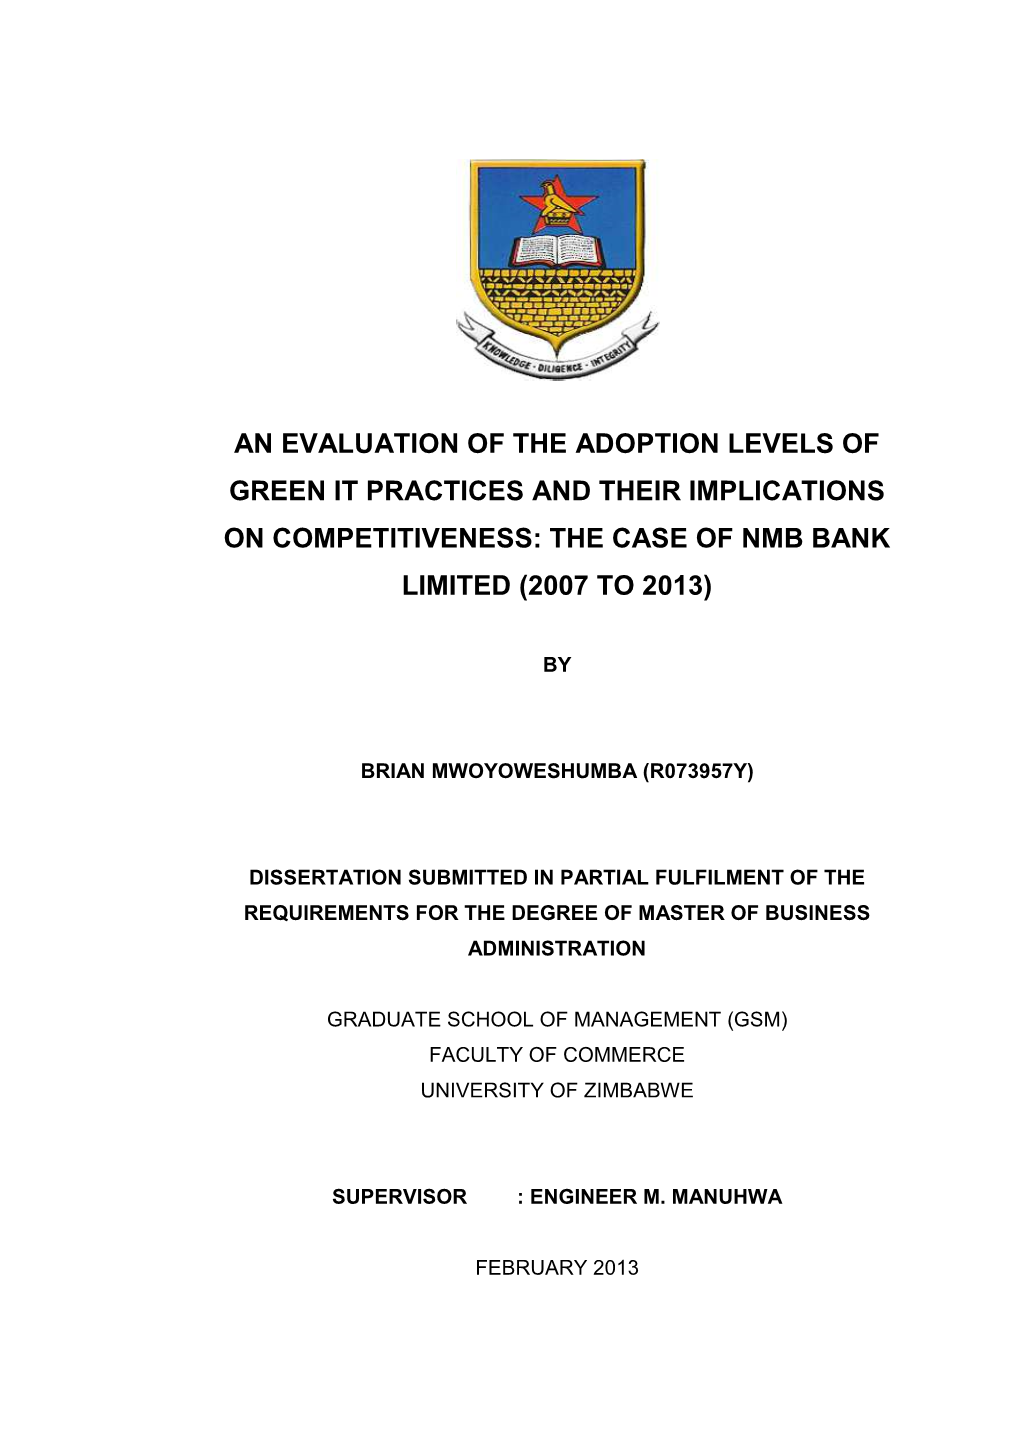 The Case of Nmb Bank Limited (2007 to 2013)